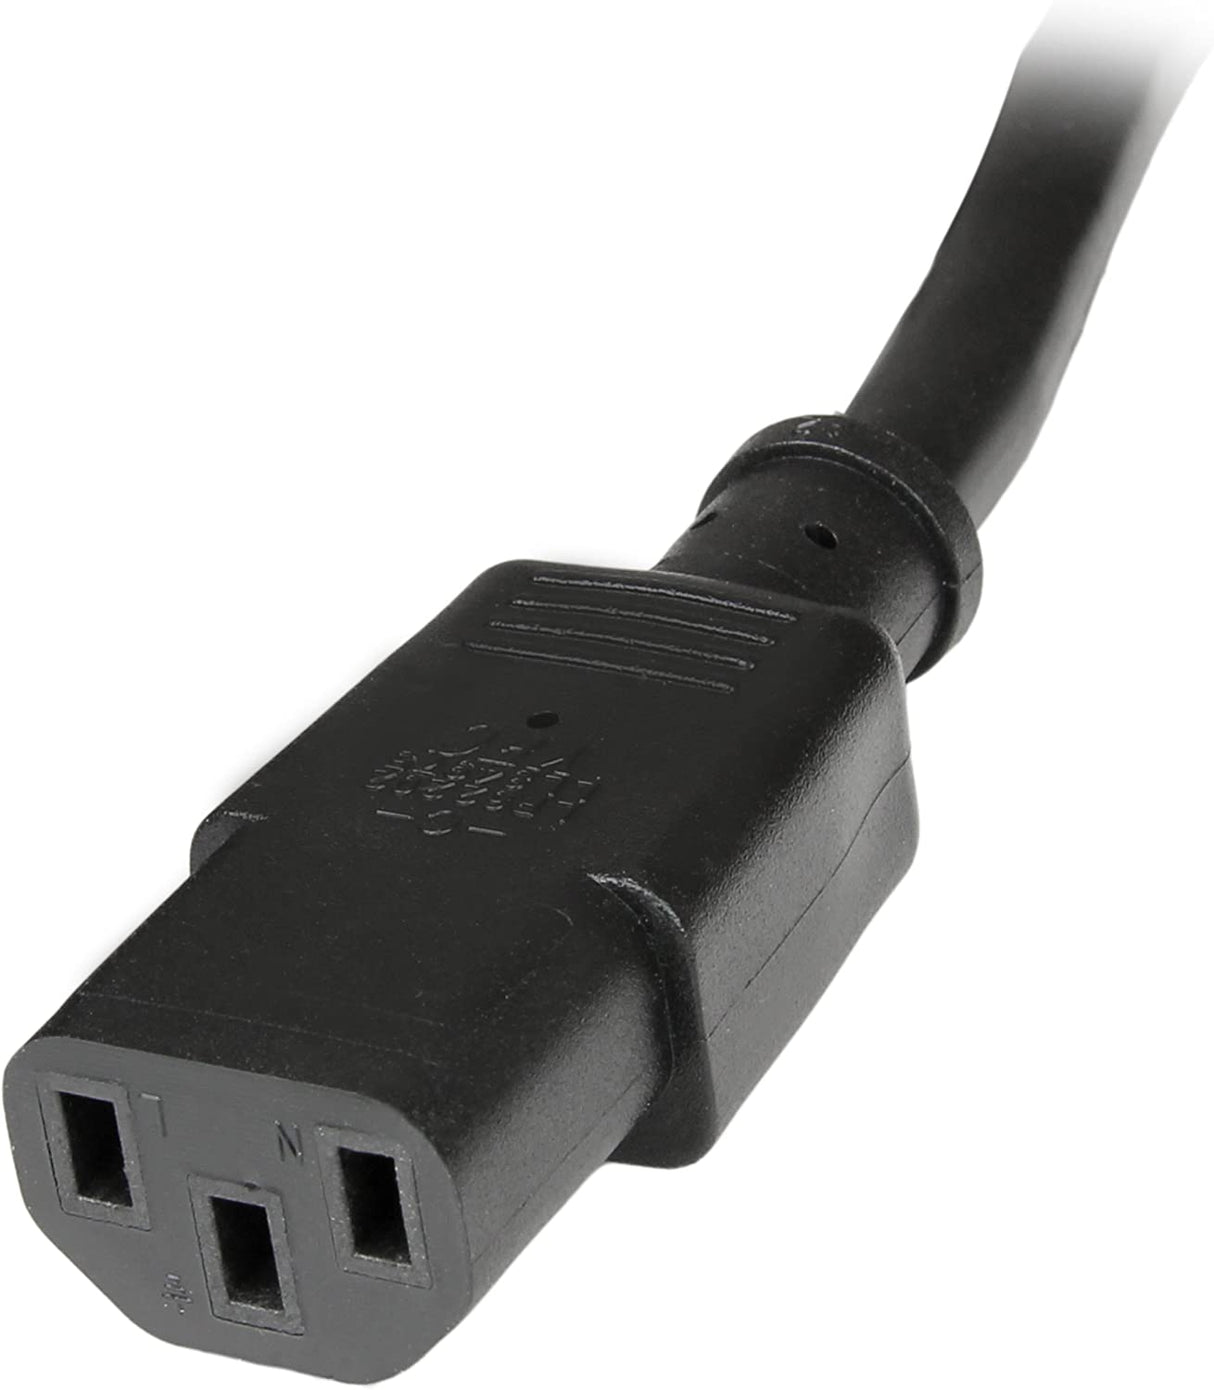 StarTech.com 2ft (0.6m) Power Extension Cord, C14 to C13, 10A 125V, 18AWG, Computer Power Cord Extension, IEC-320-C14 to IEC-320-C13 AC Power Cable Extension for Power Supply, UL Listed (PXT1002) 2 ft/0.6 m 16 AWG